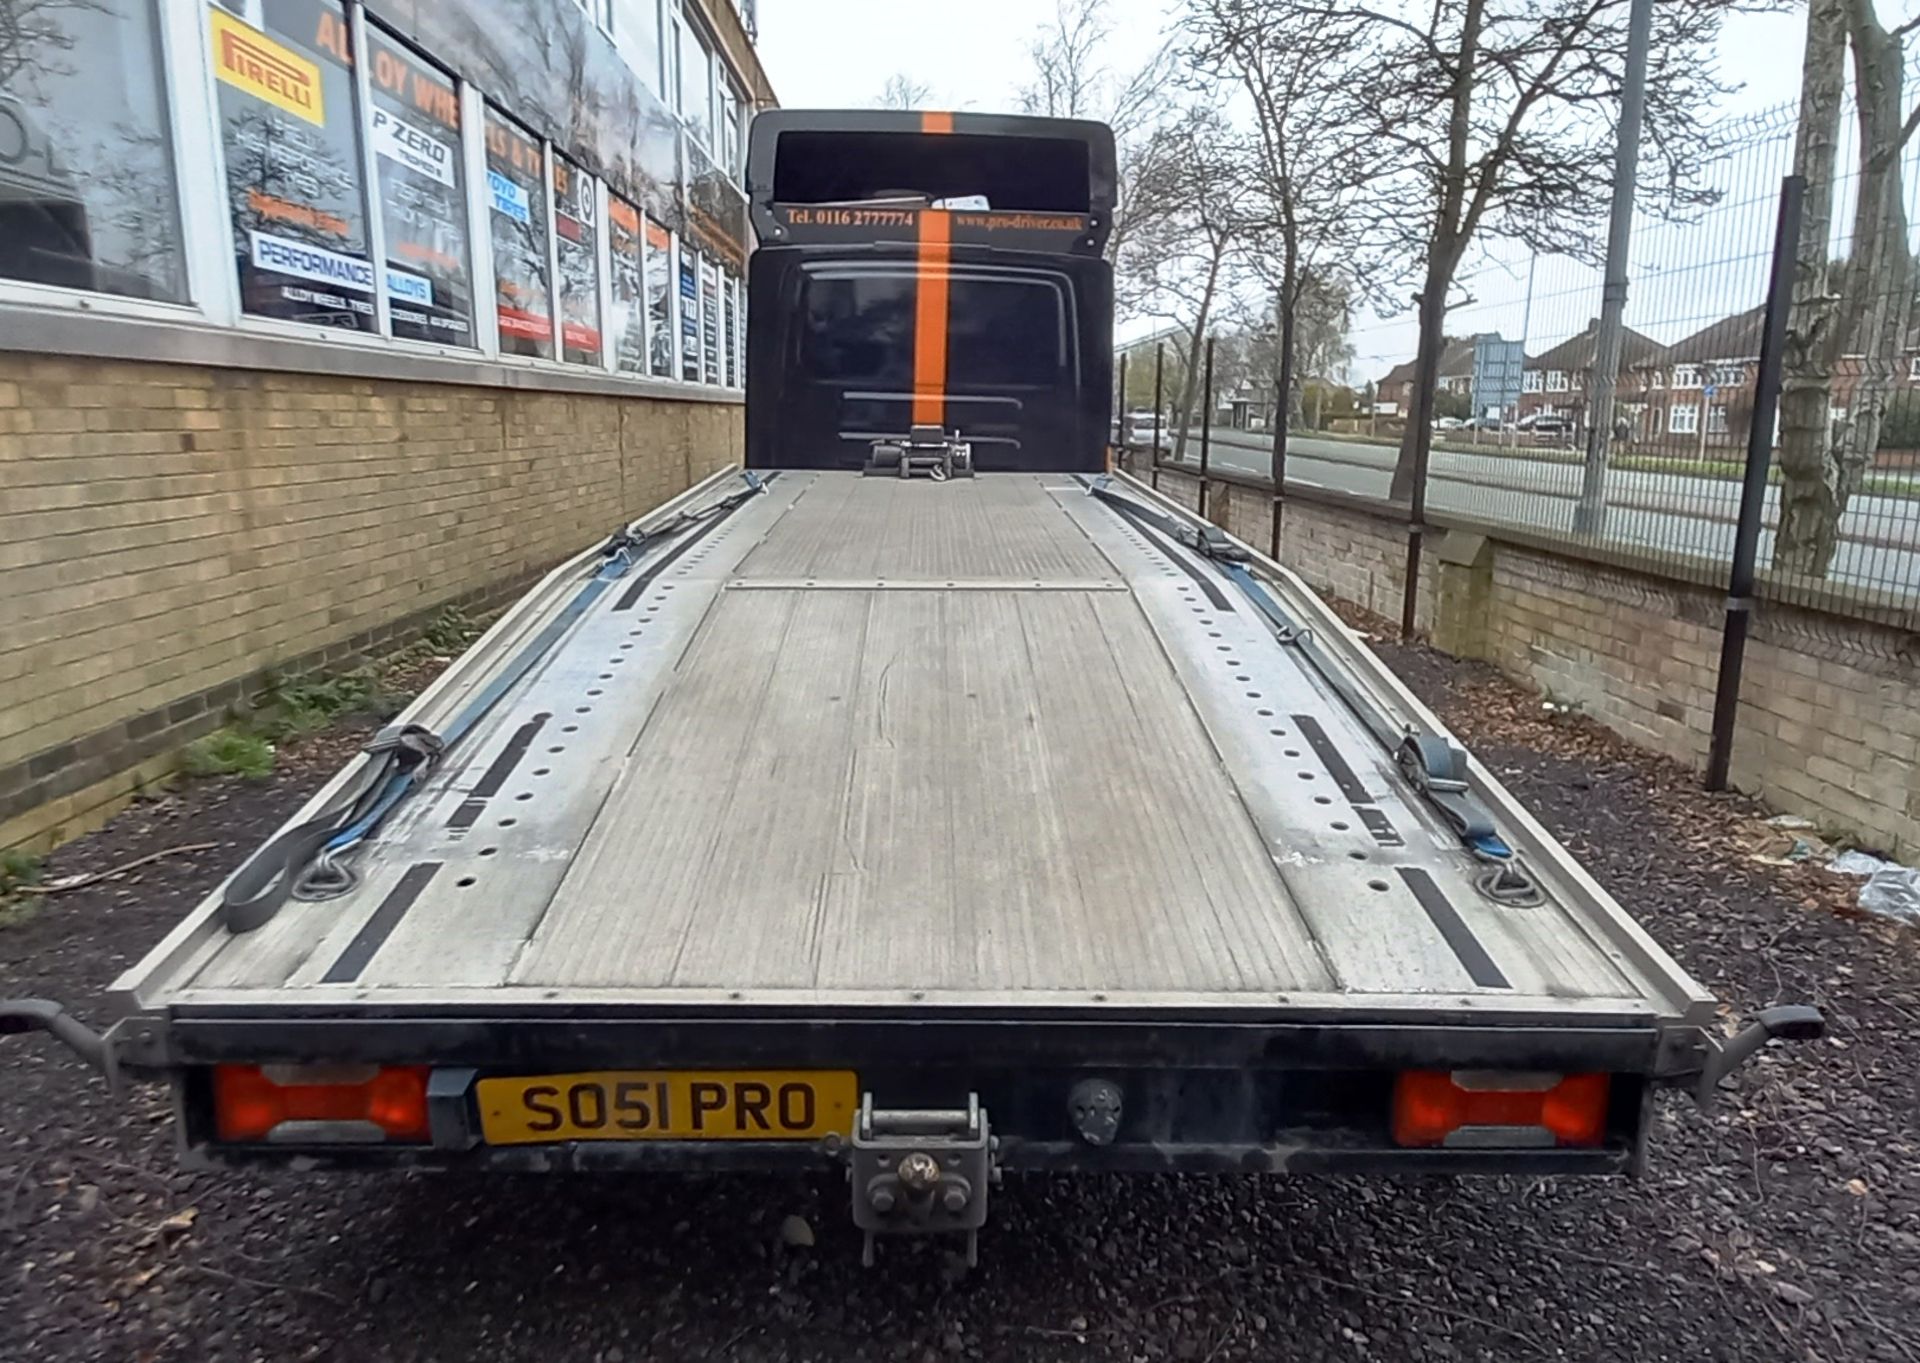 Iveco Daily 5.2 Ton Vehicle Transporter with Sleeper Cab, Registration SO51 PRO, First Registered: - Image 6 of 14